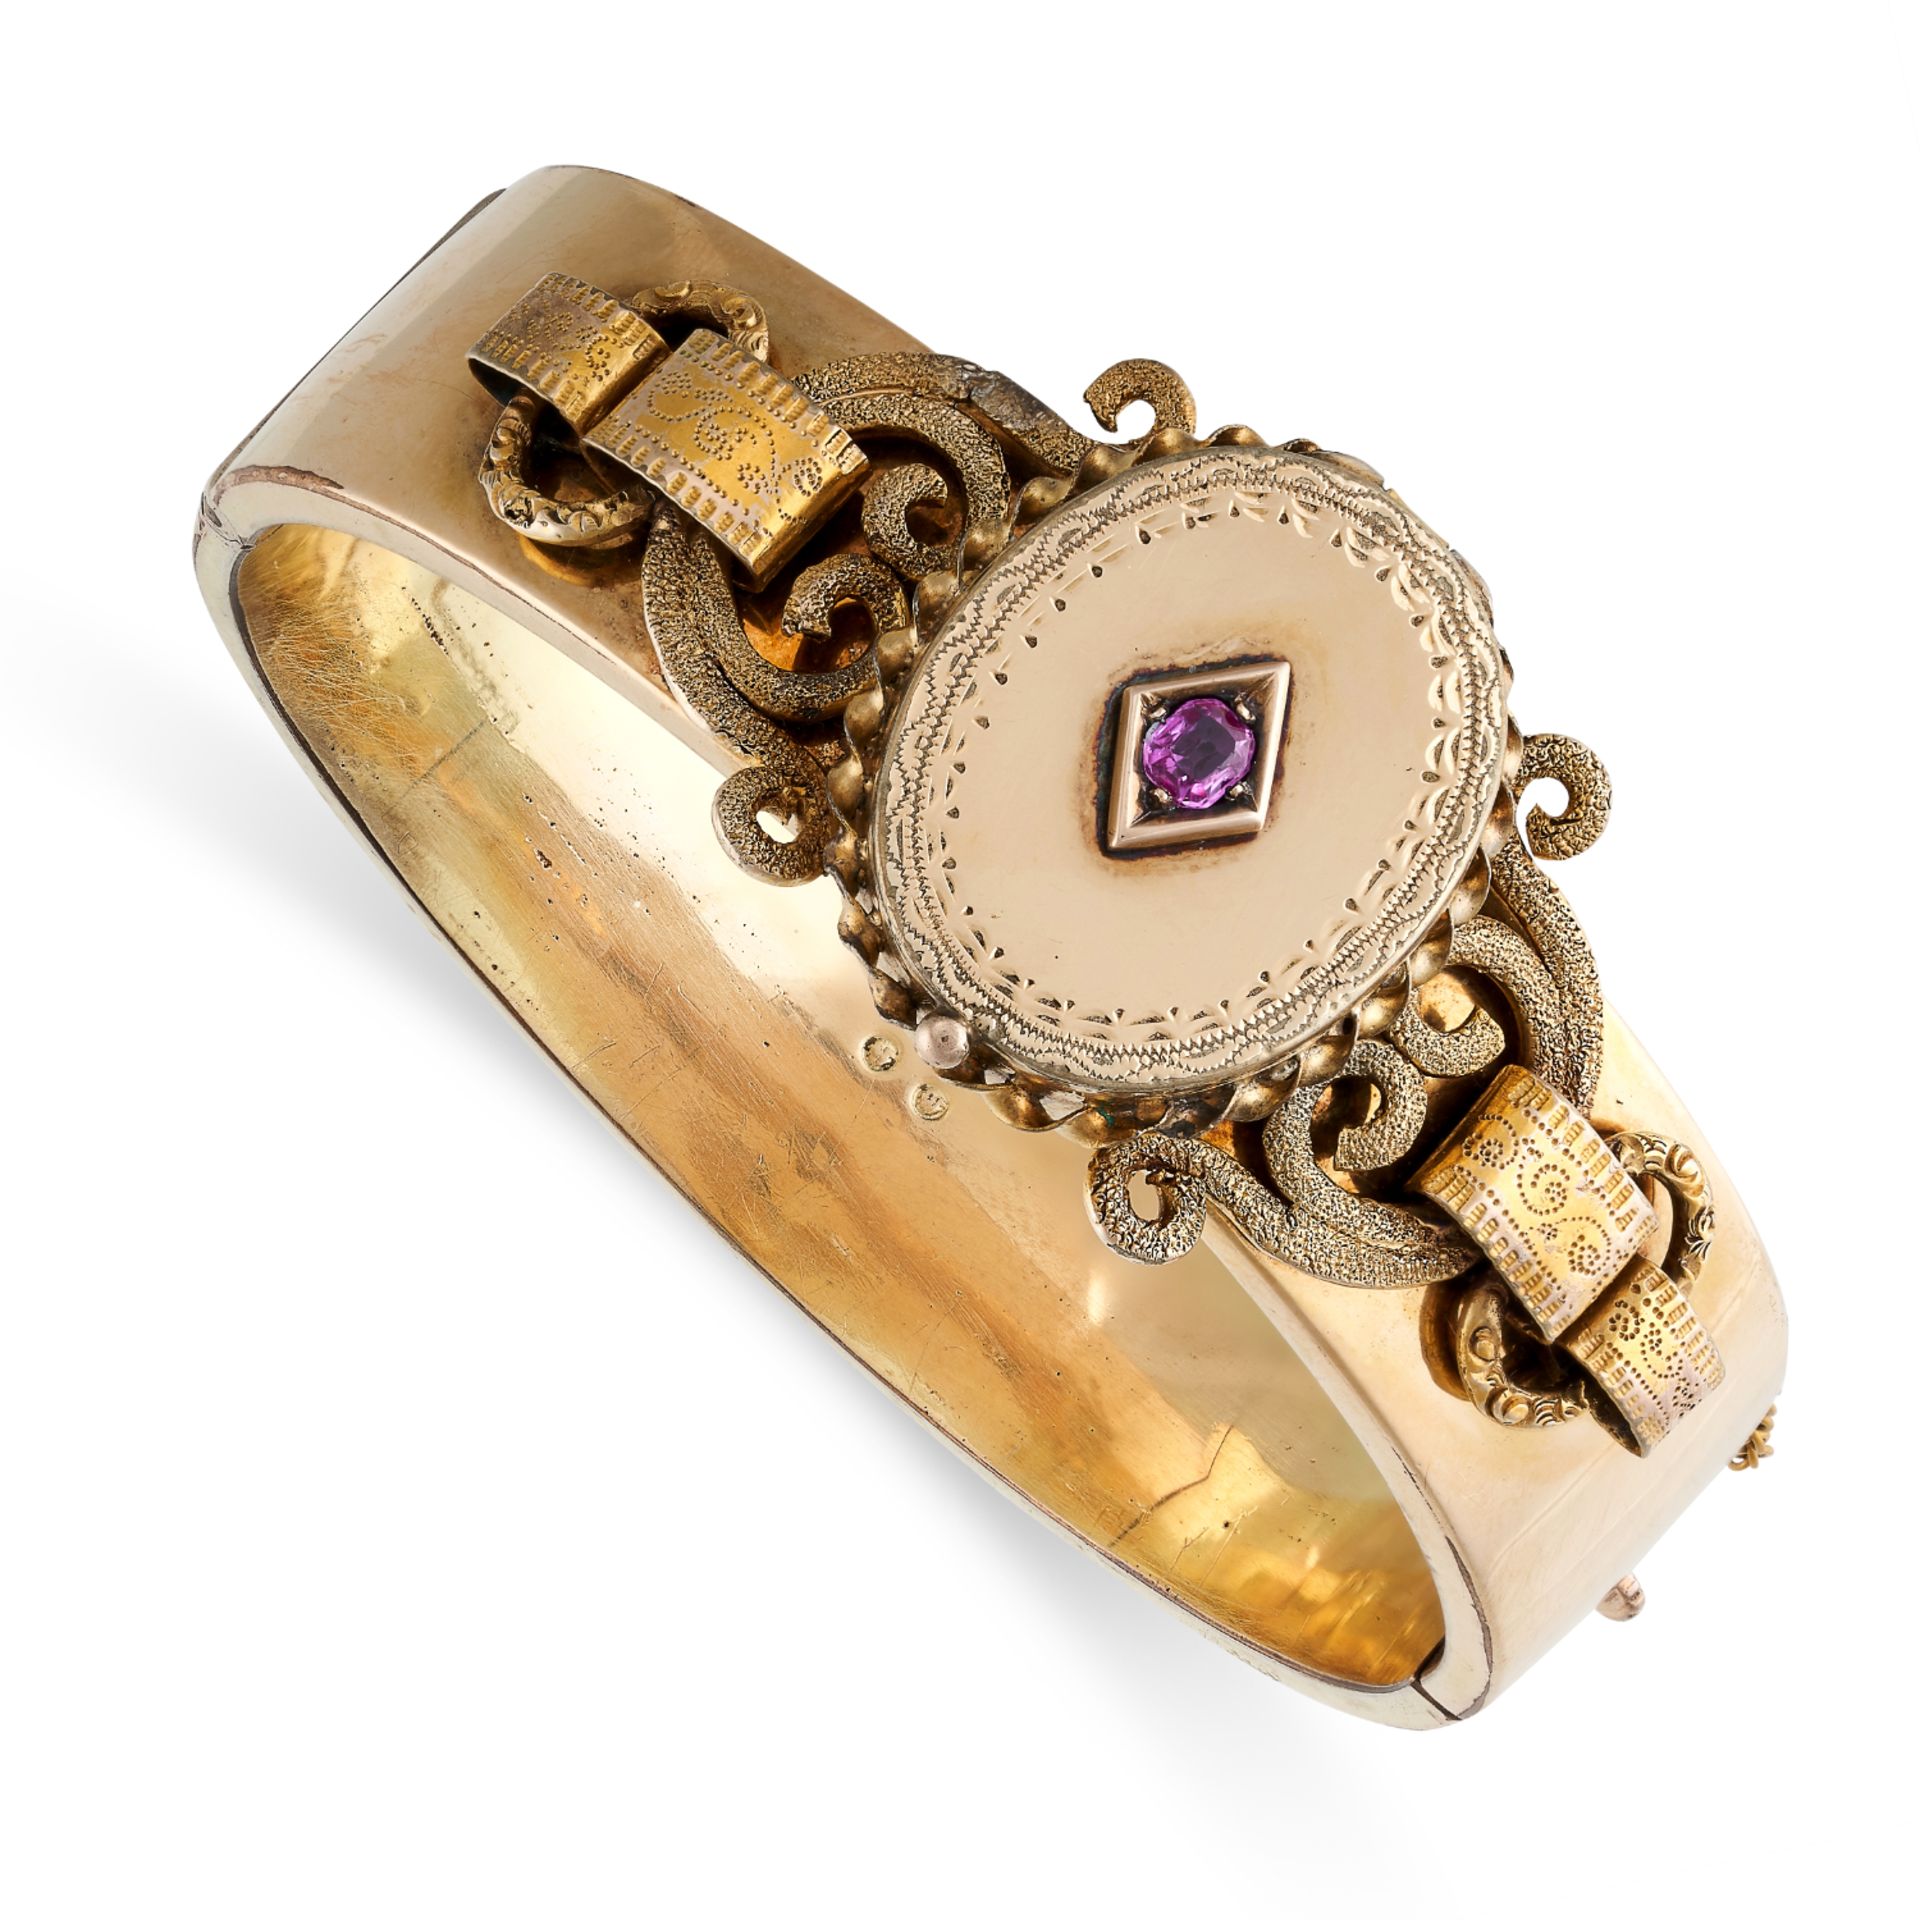 AN ANTIQUE RUBY MOURNING LOCKET BANGLE in 14ct yellow gold, the hinged body with a concealed